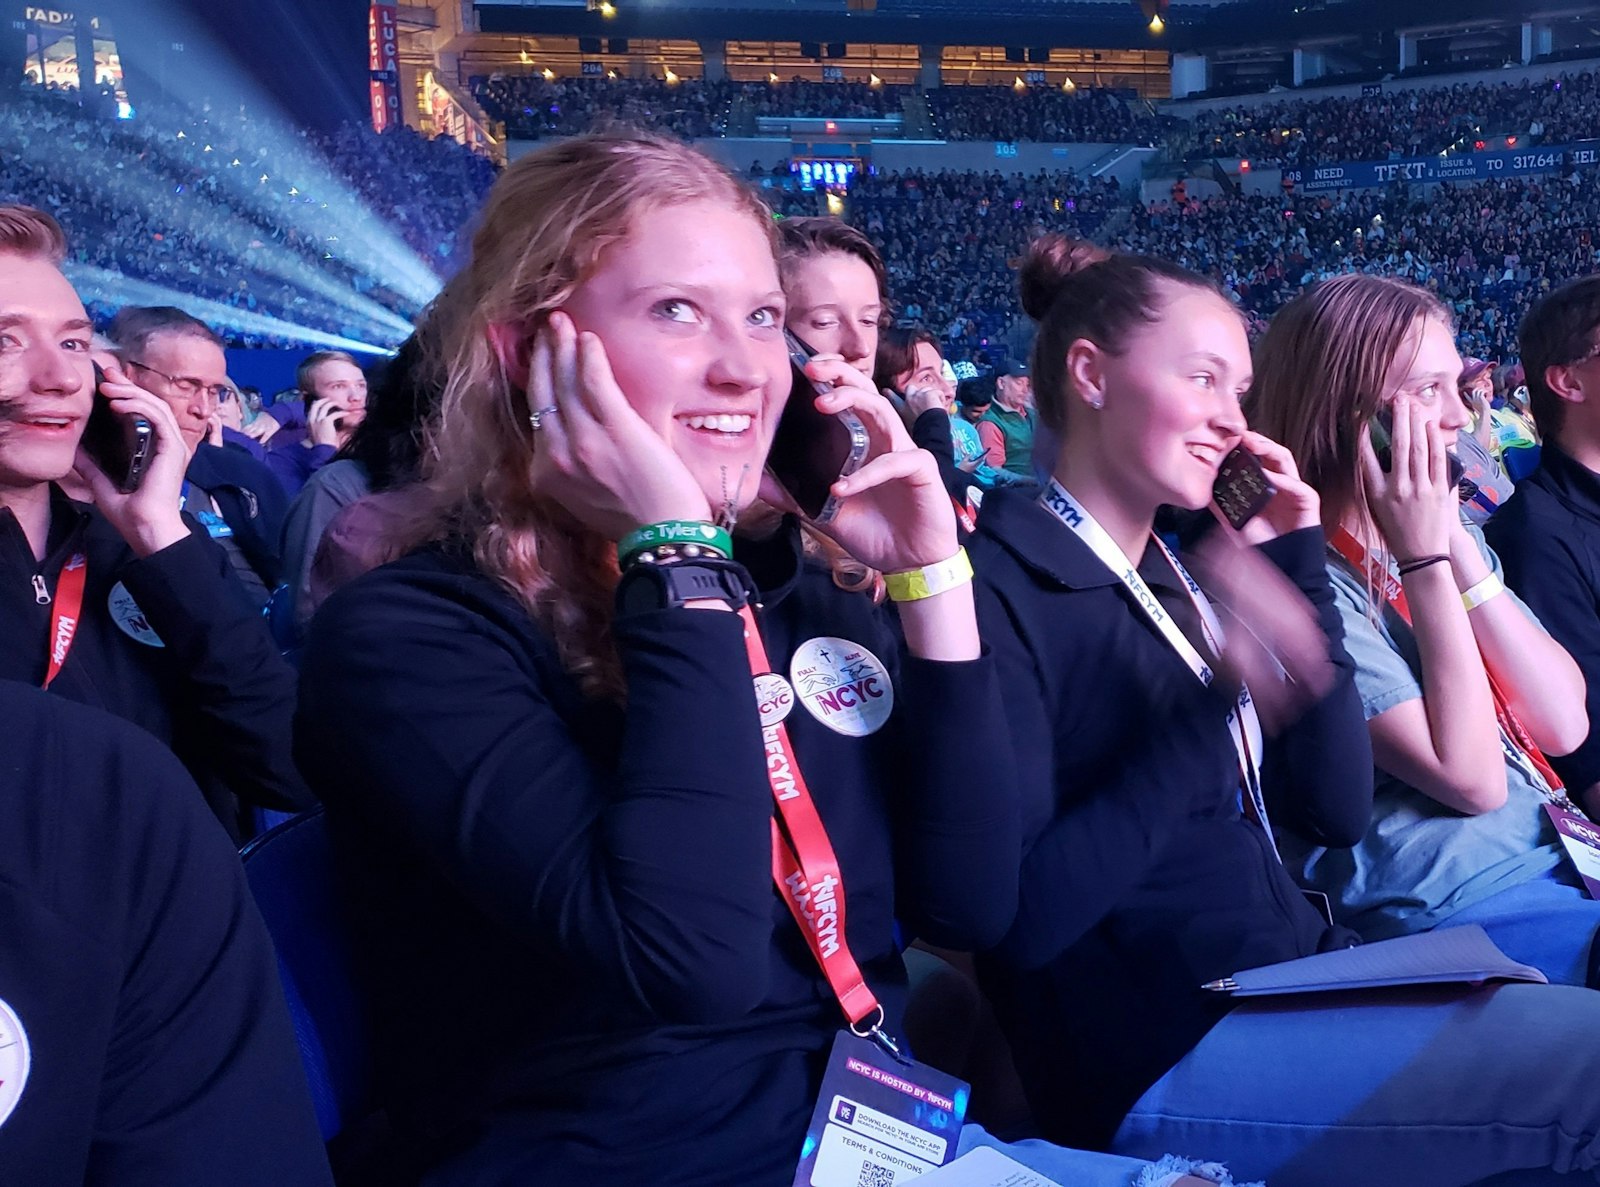 Grace Stecker of the Diocese of Helena, Mont., and those around her call a loved one (for Grace, her dad), as an exercise during the opening session of the National Catholic Youth Conference in Lucas Oil Stadium in Indianapolis on Nov. 16. (OSV News photo/Natalie Hoefer, The Criterion)